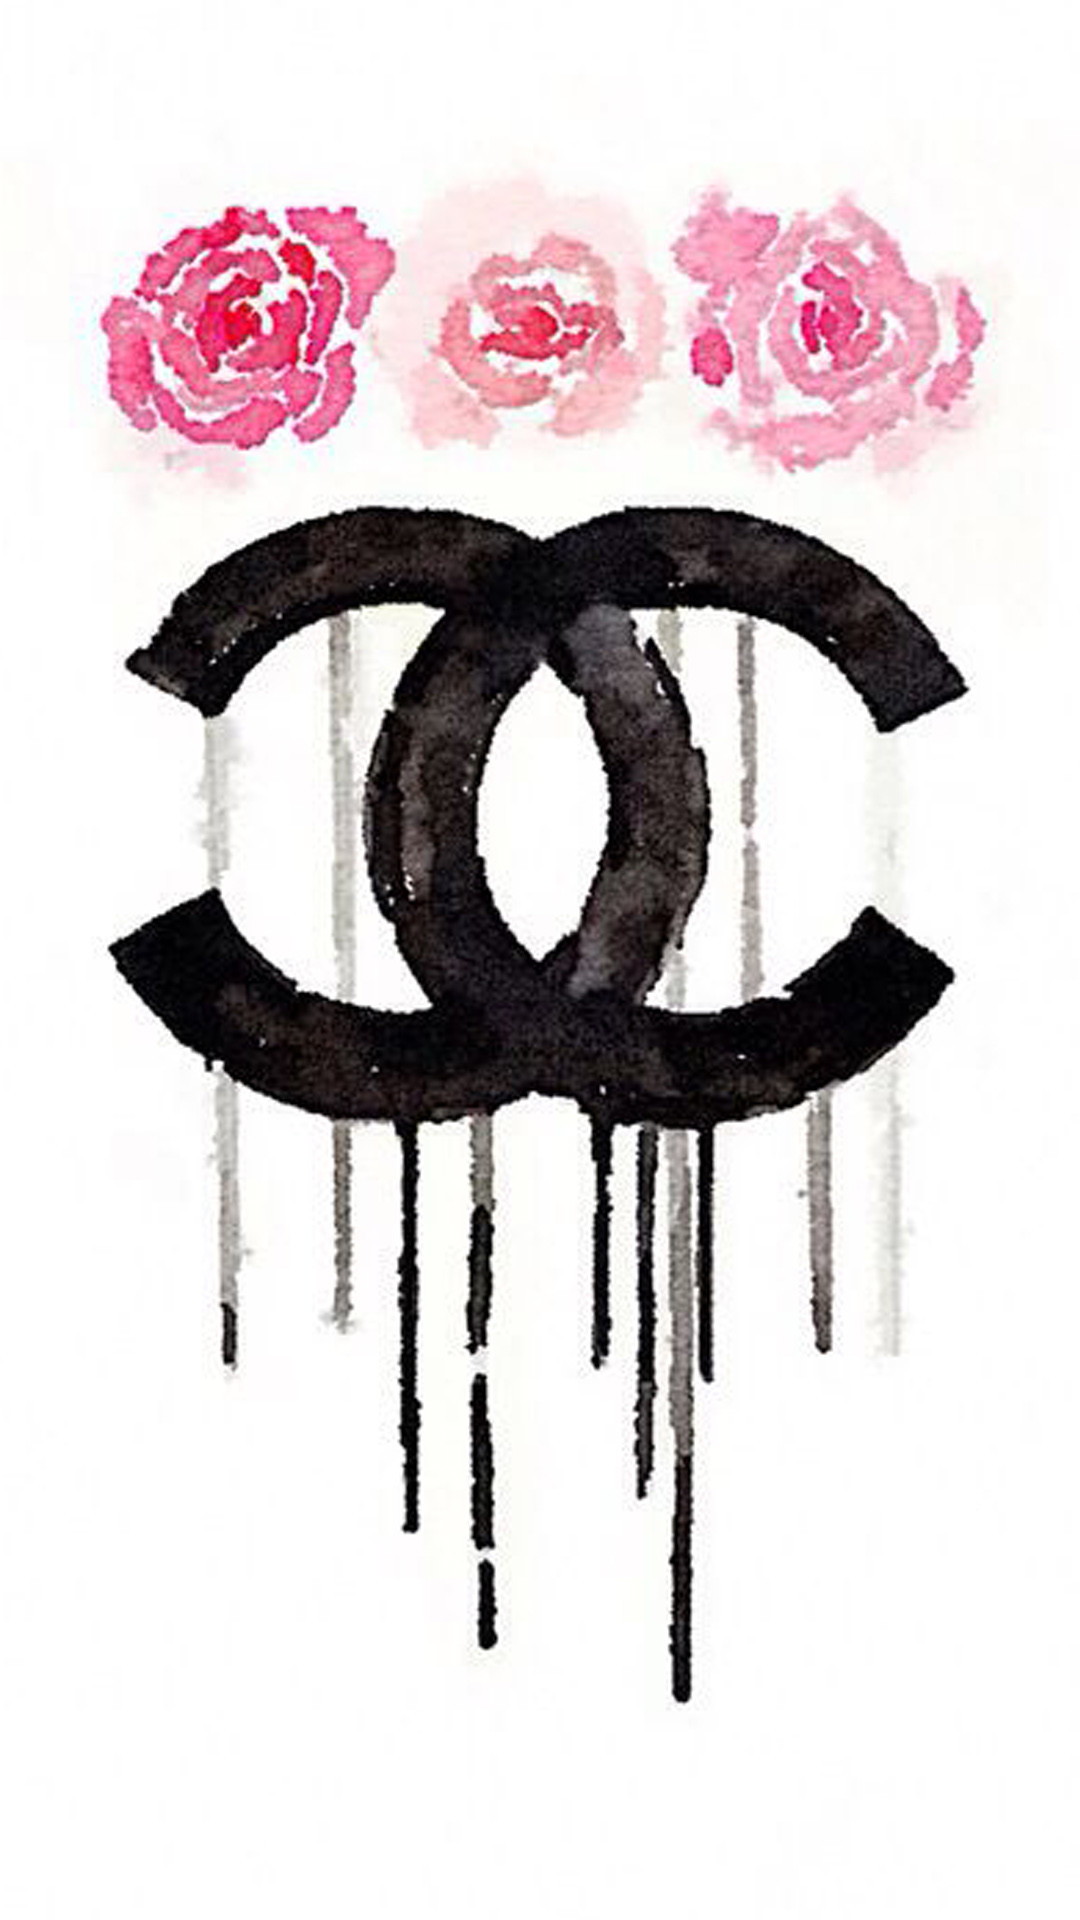 Girly Chanel Best Iphone Wallpapers Wallpaper For Iphone Photo 